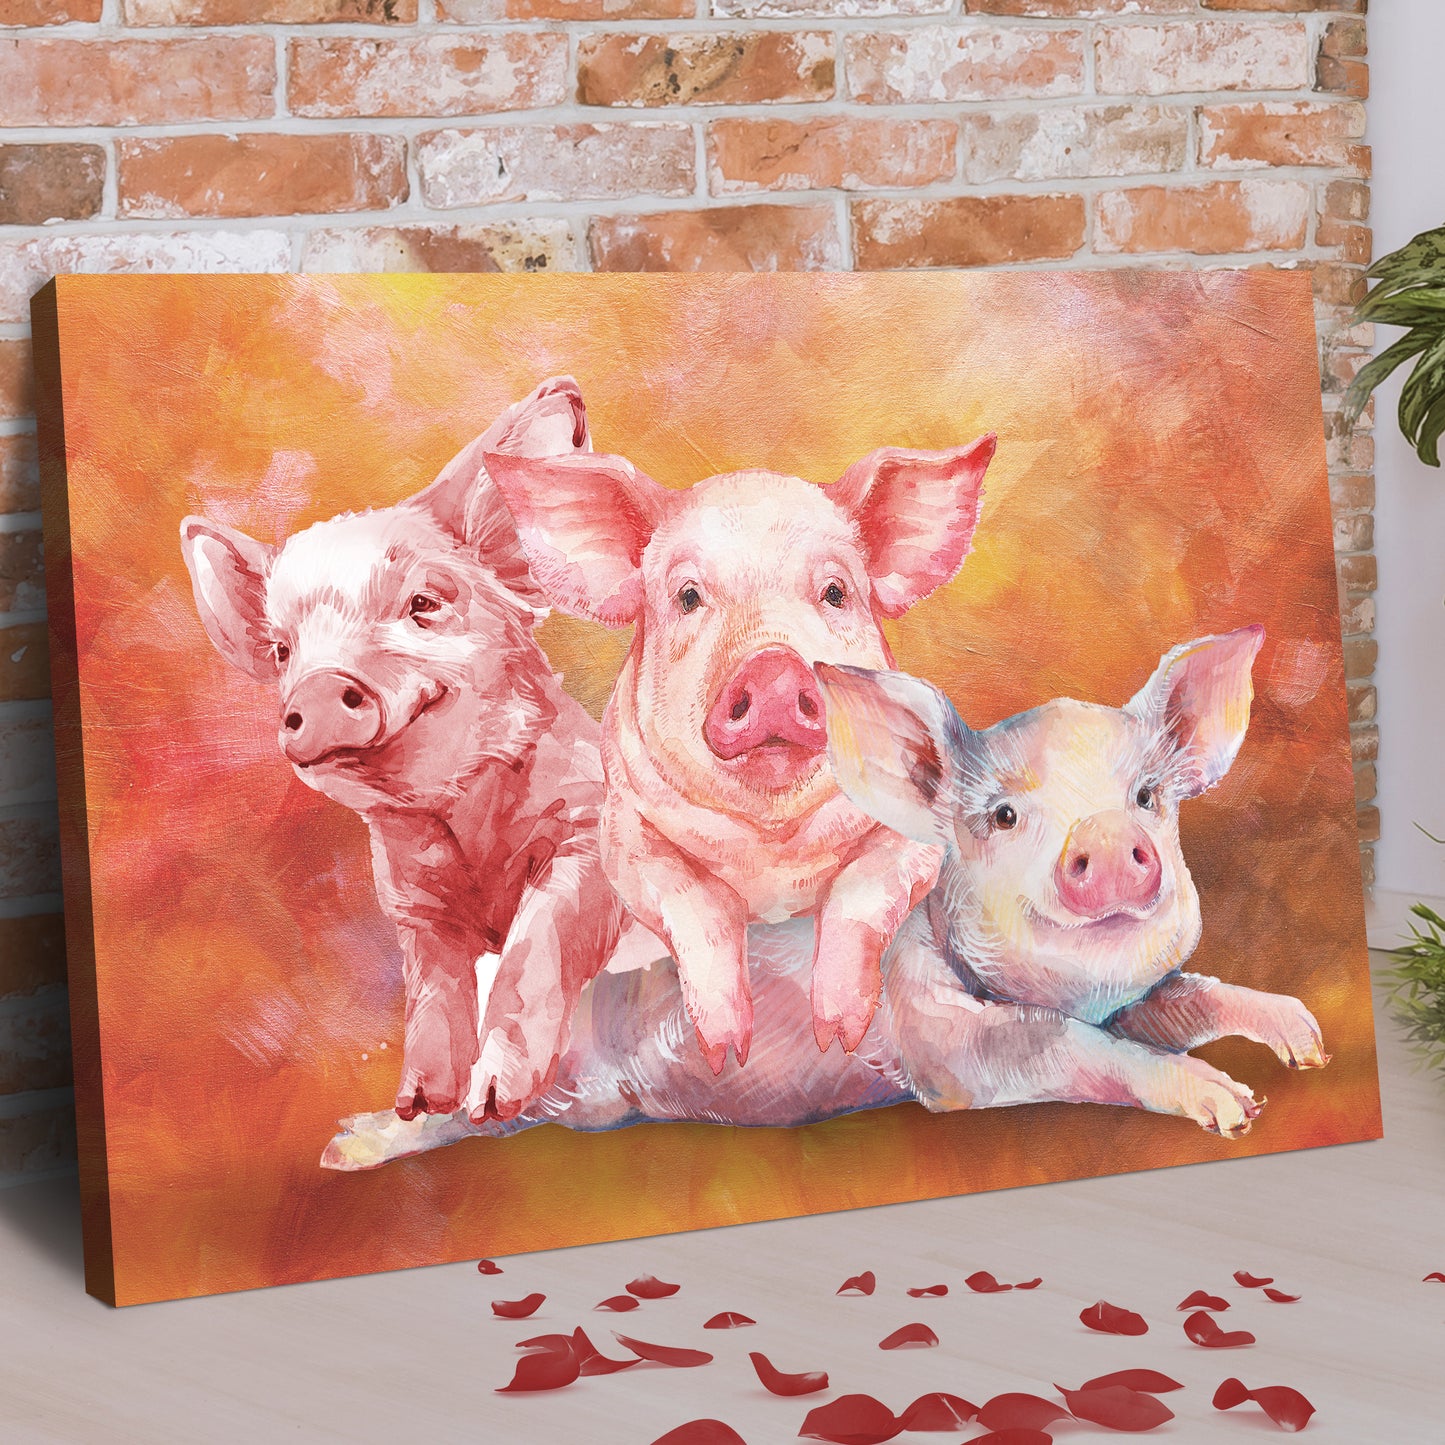 Three Baby Pigs Watercolor Canvas Wall Art Style 1 - Image by Tailored Canvases